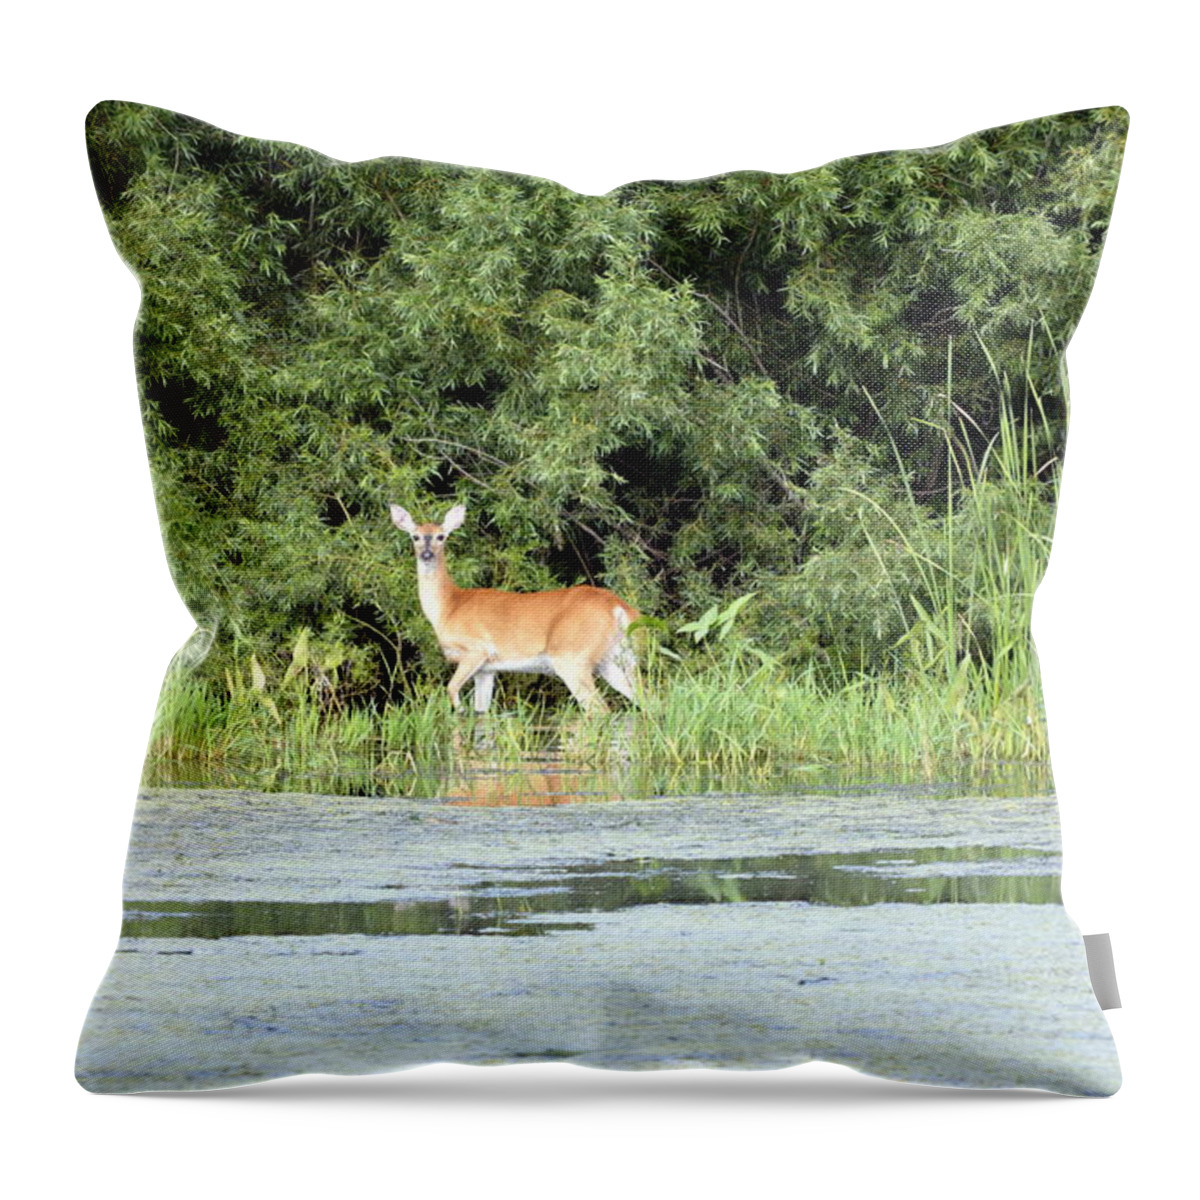 Deer Throw Pillow featuring the photograph The Wading Pool by Bonfire Photography